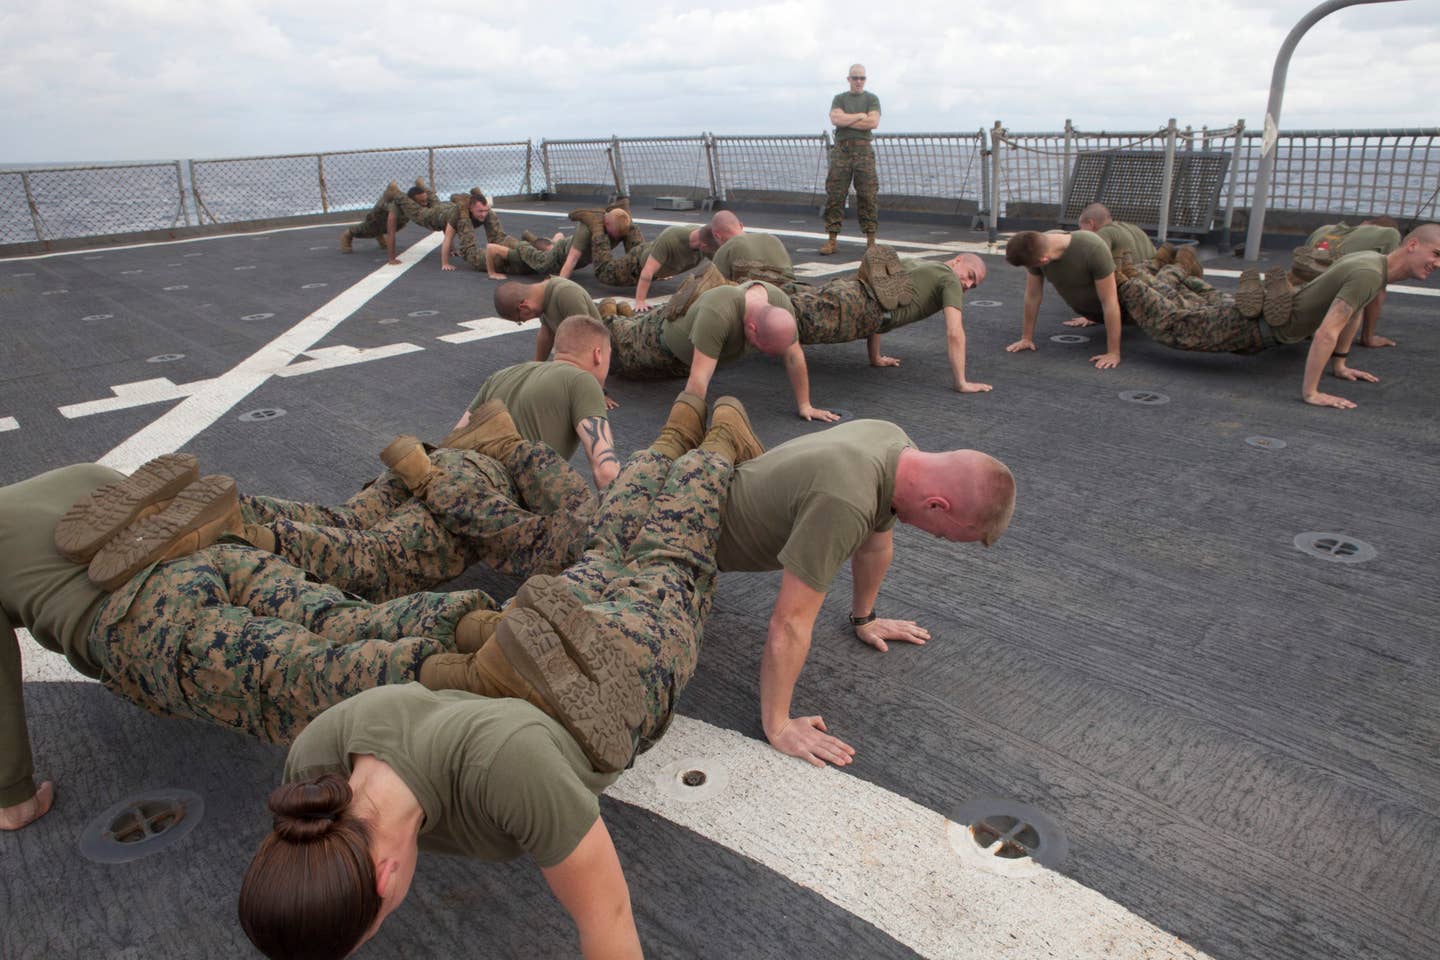 For a bonus, grab a few of your also-tired comrades and have a party. (USMC photo by Cpl. Jacqueline Sanderfer)